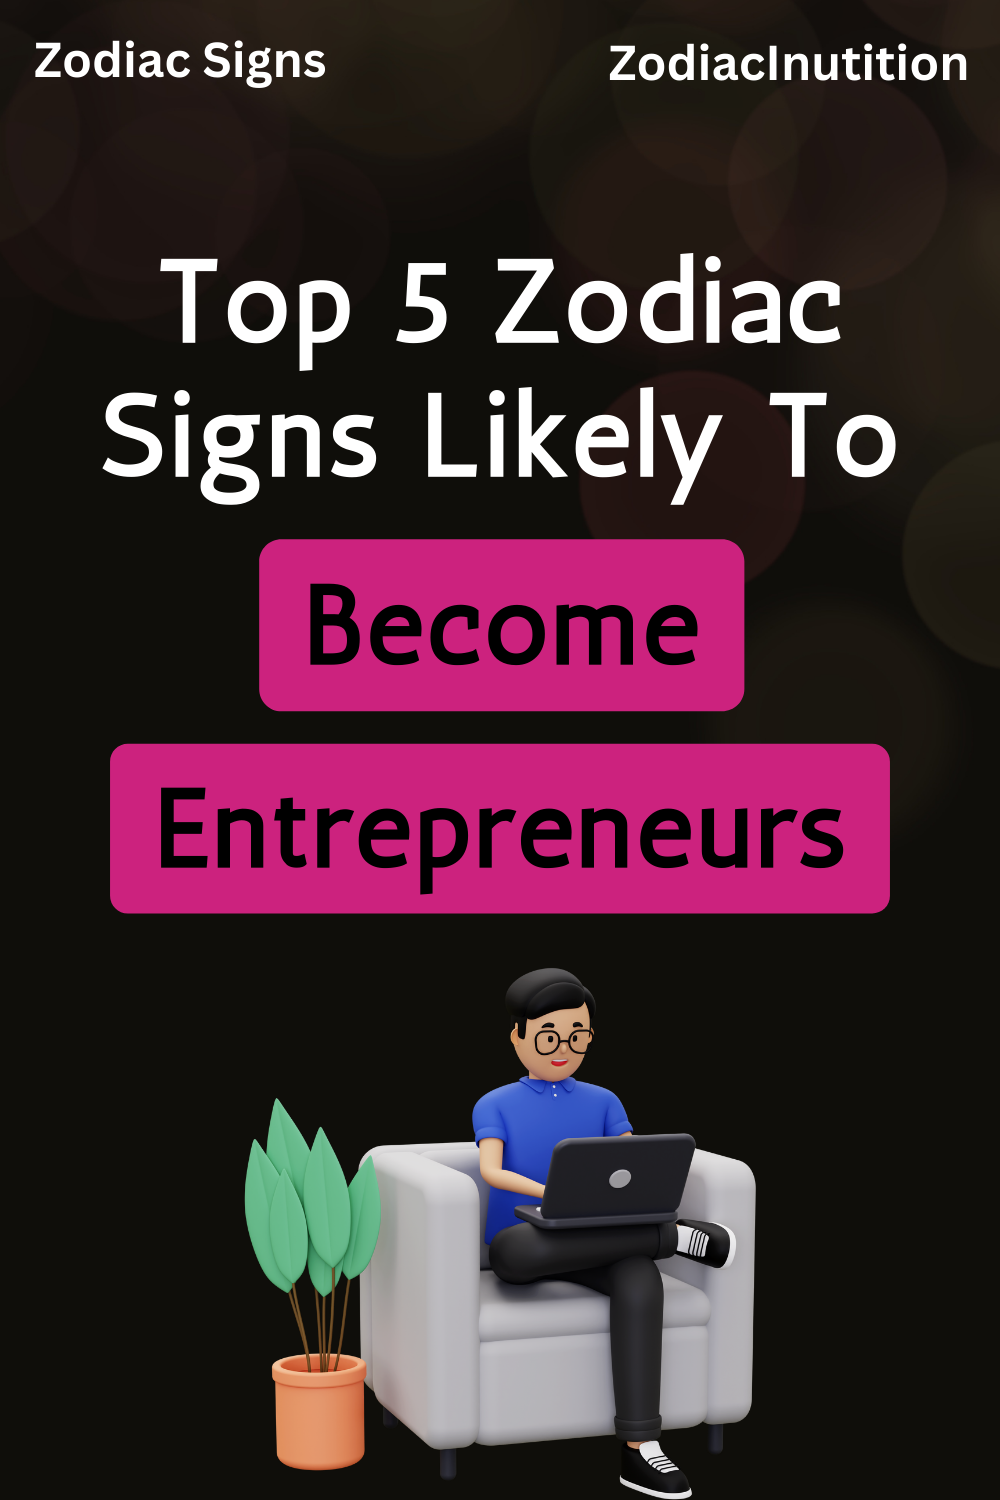 Top 5 Zodiac Signs Likely To Become Entrepreneurs